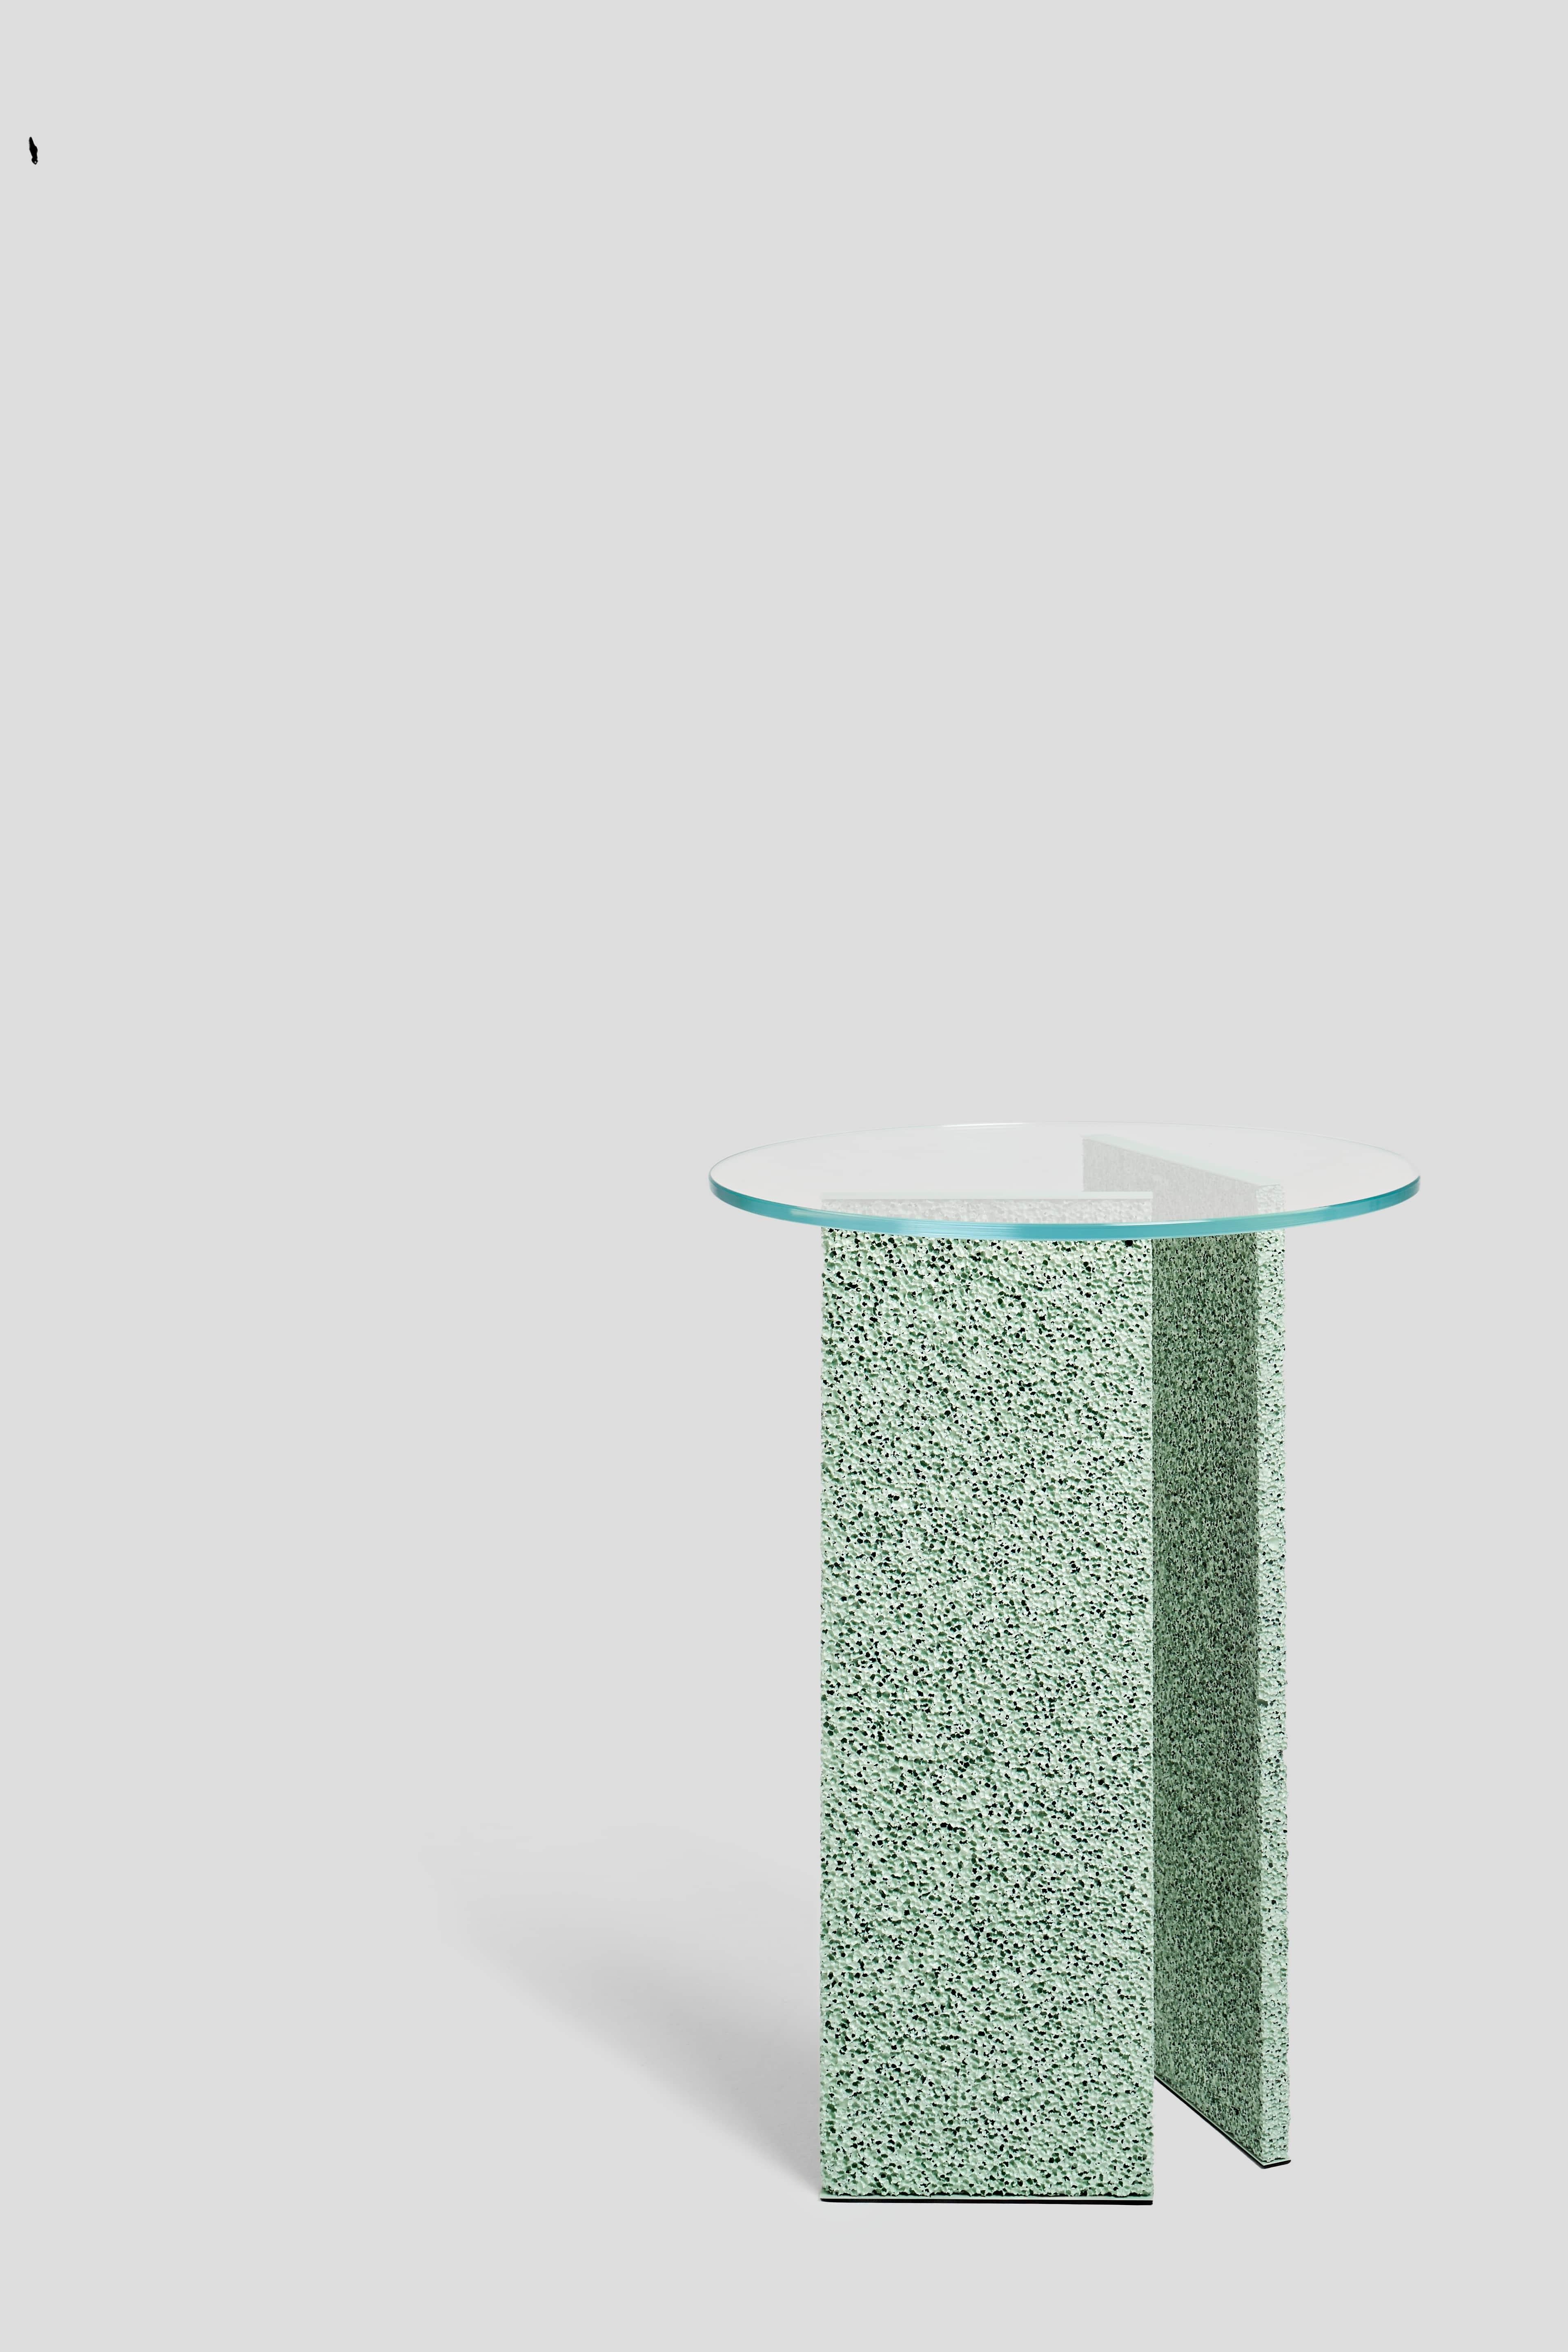 Cast SLAB Light Green Textured Side Table With Glass Top For Sale